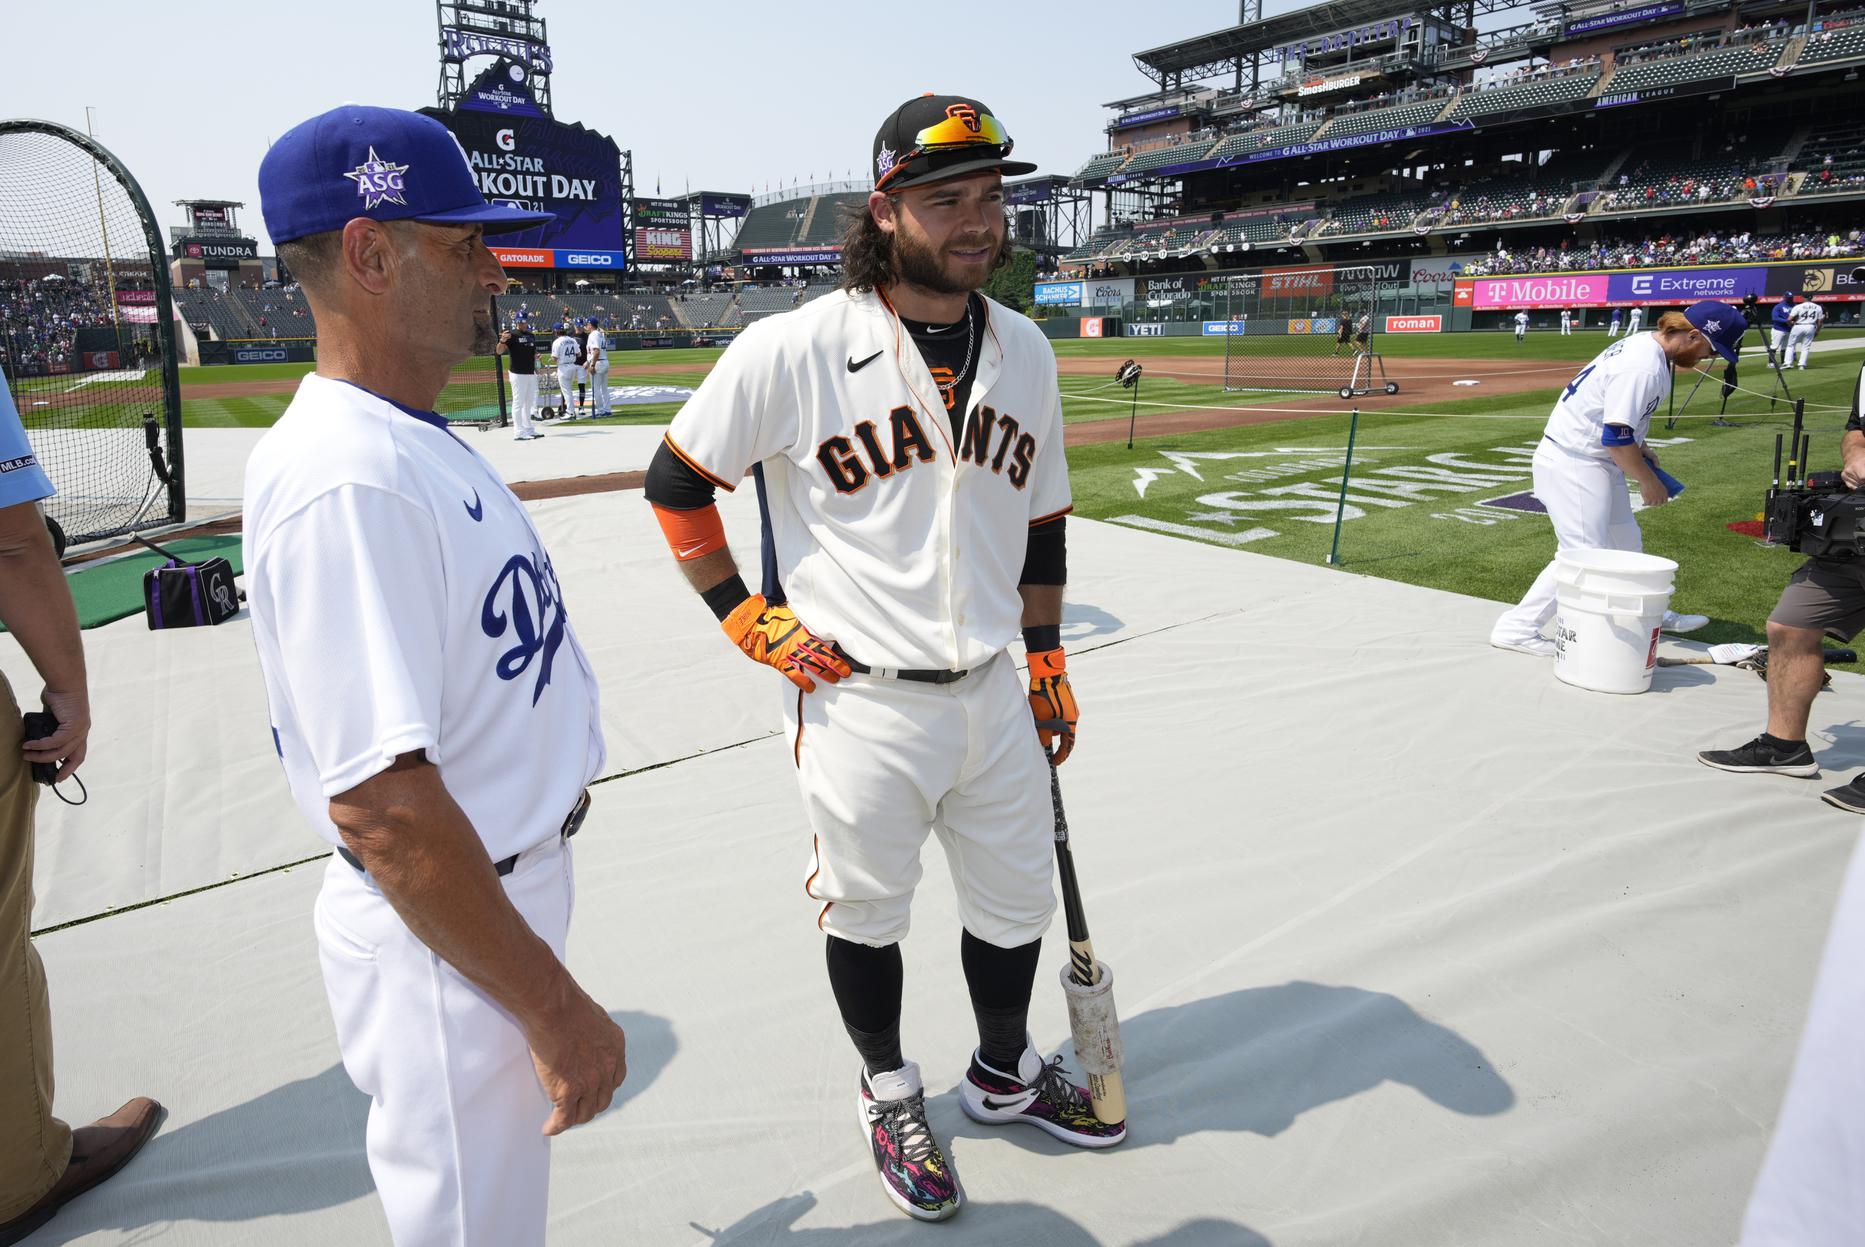 5 SF Giants players who will make the 2022 MLB All-Star team